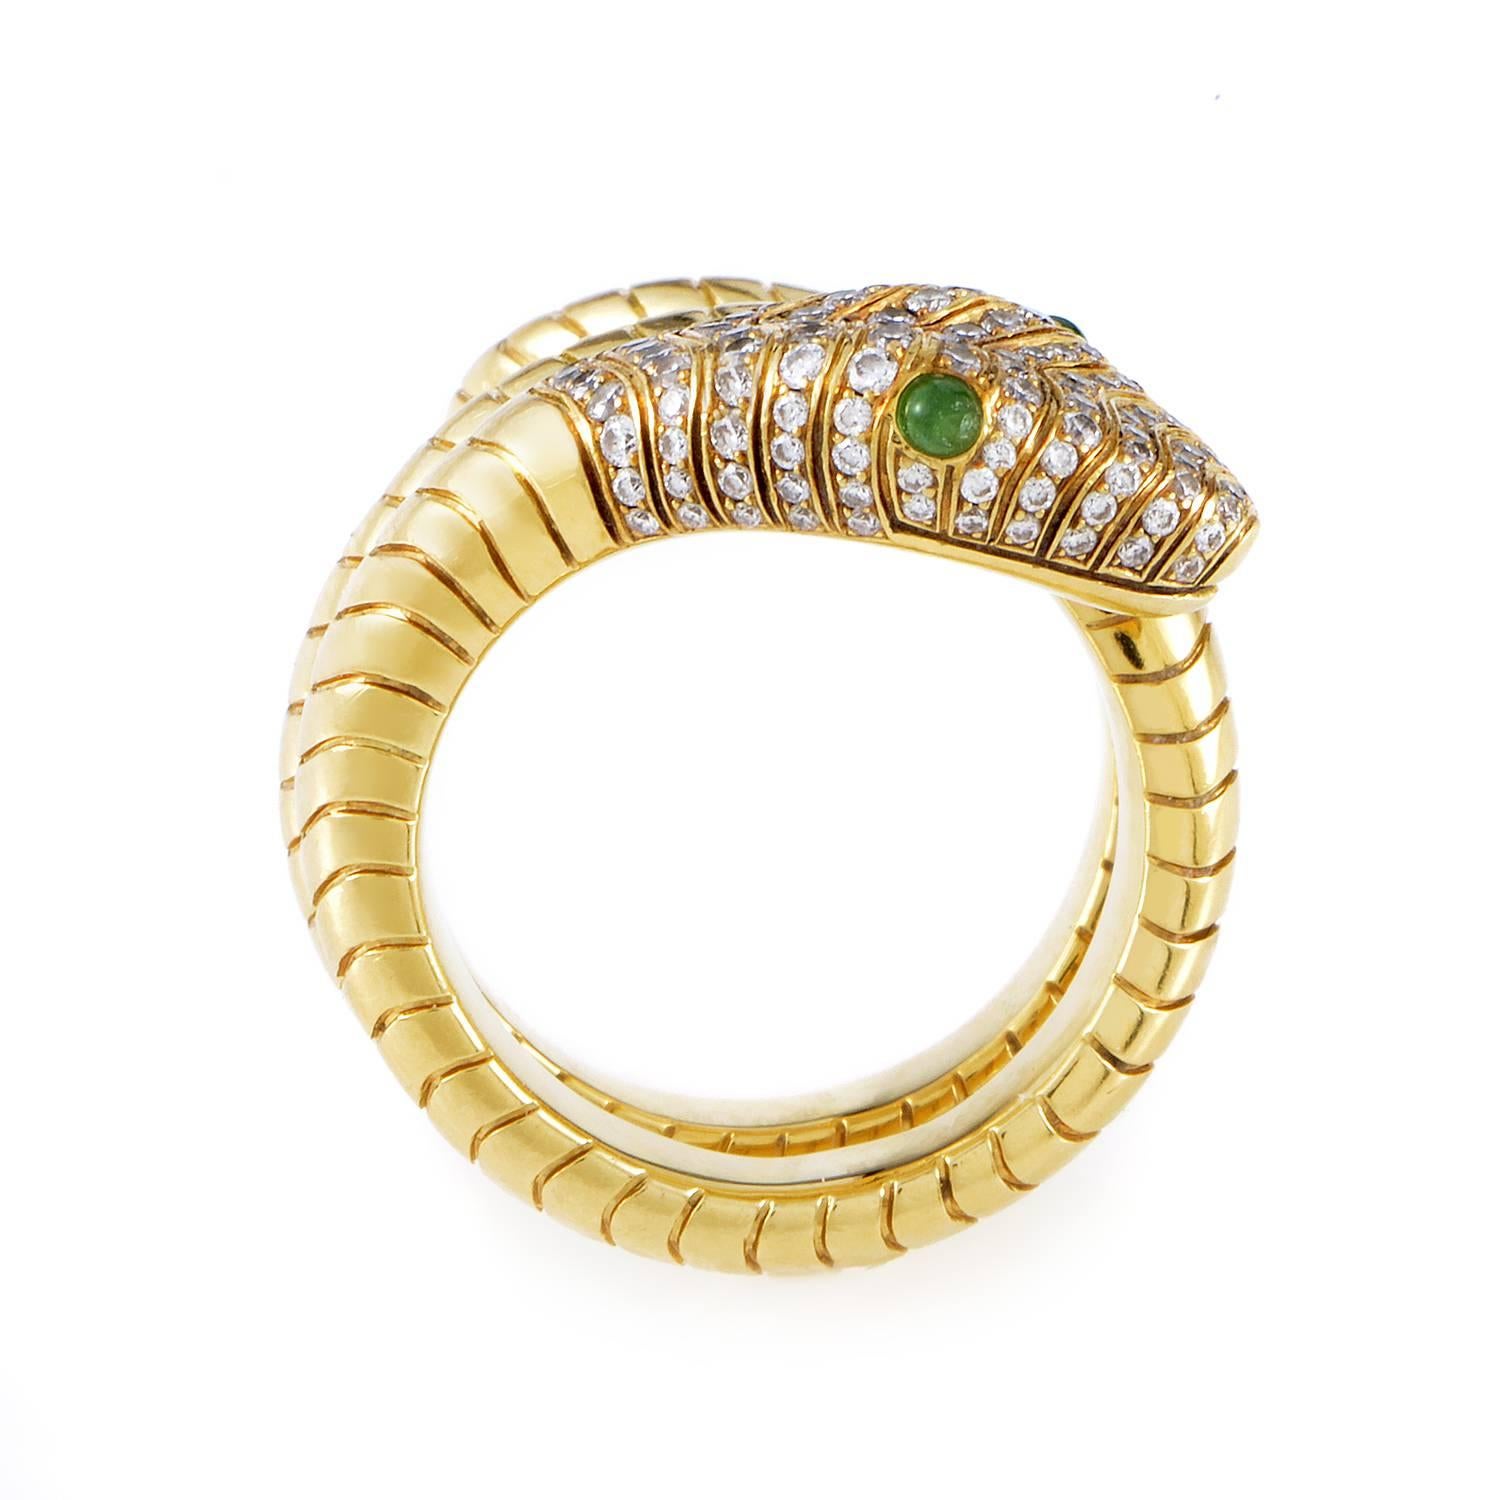 Curling around your finger in graceful and gleaming fashion, this offbeat ring from Asprey assumes the intriguing form of an 18K yellow gold snake embellished with 0.60ct of glittering diamonds at the top of its head while boasting two delicate